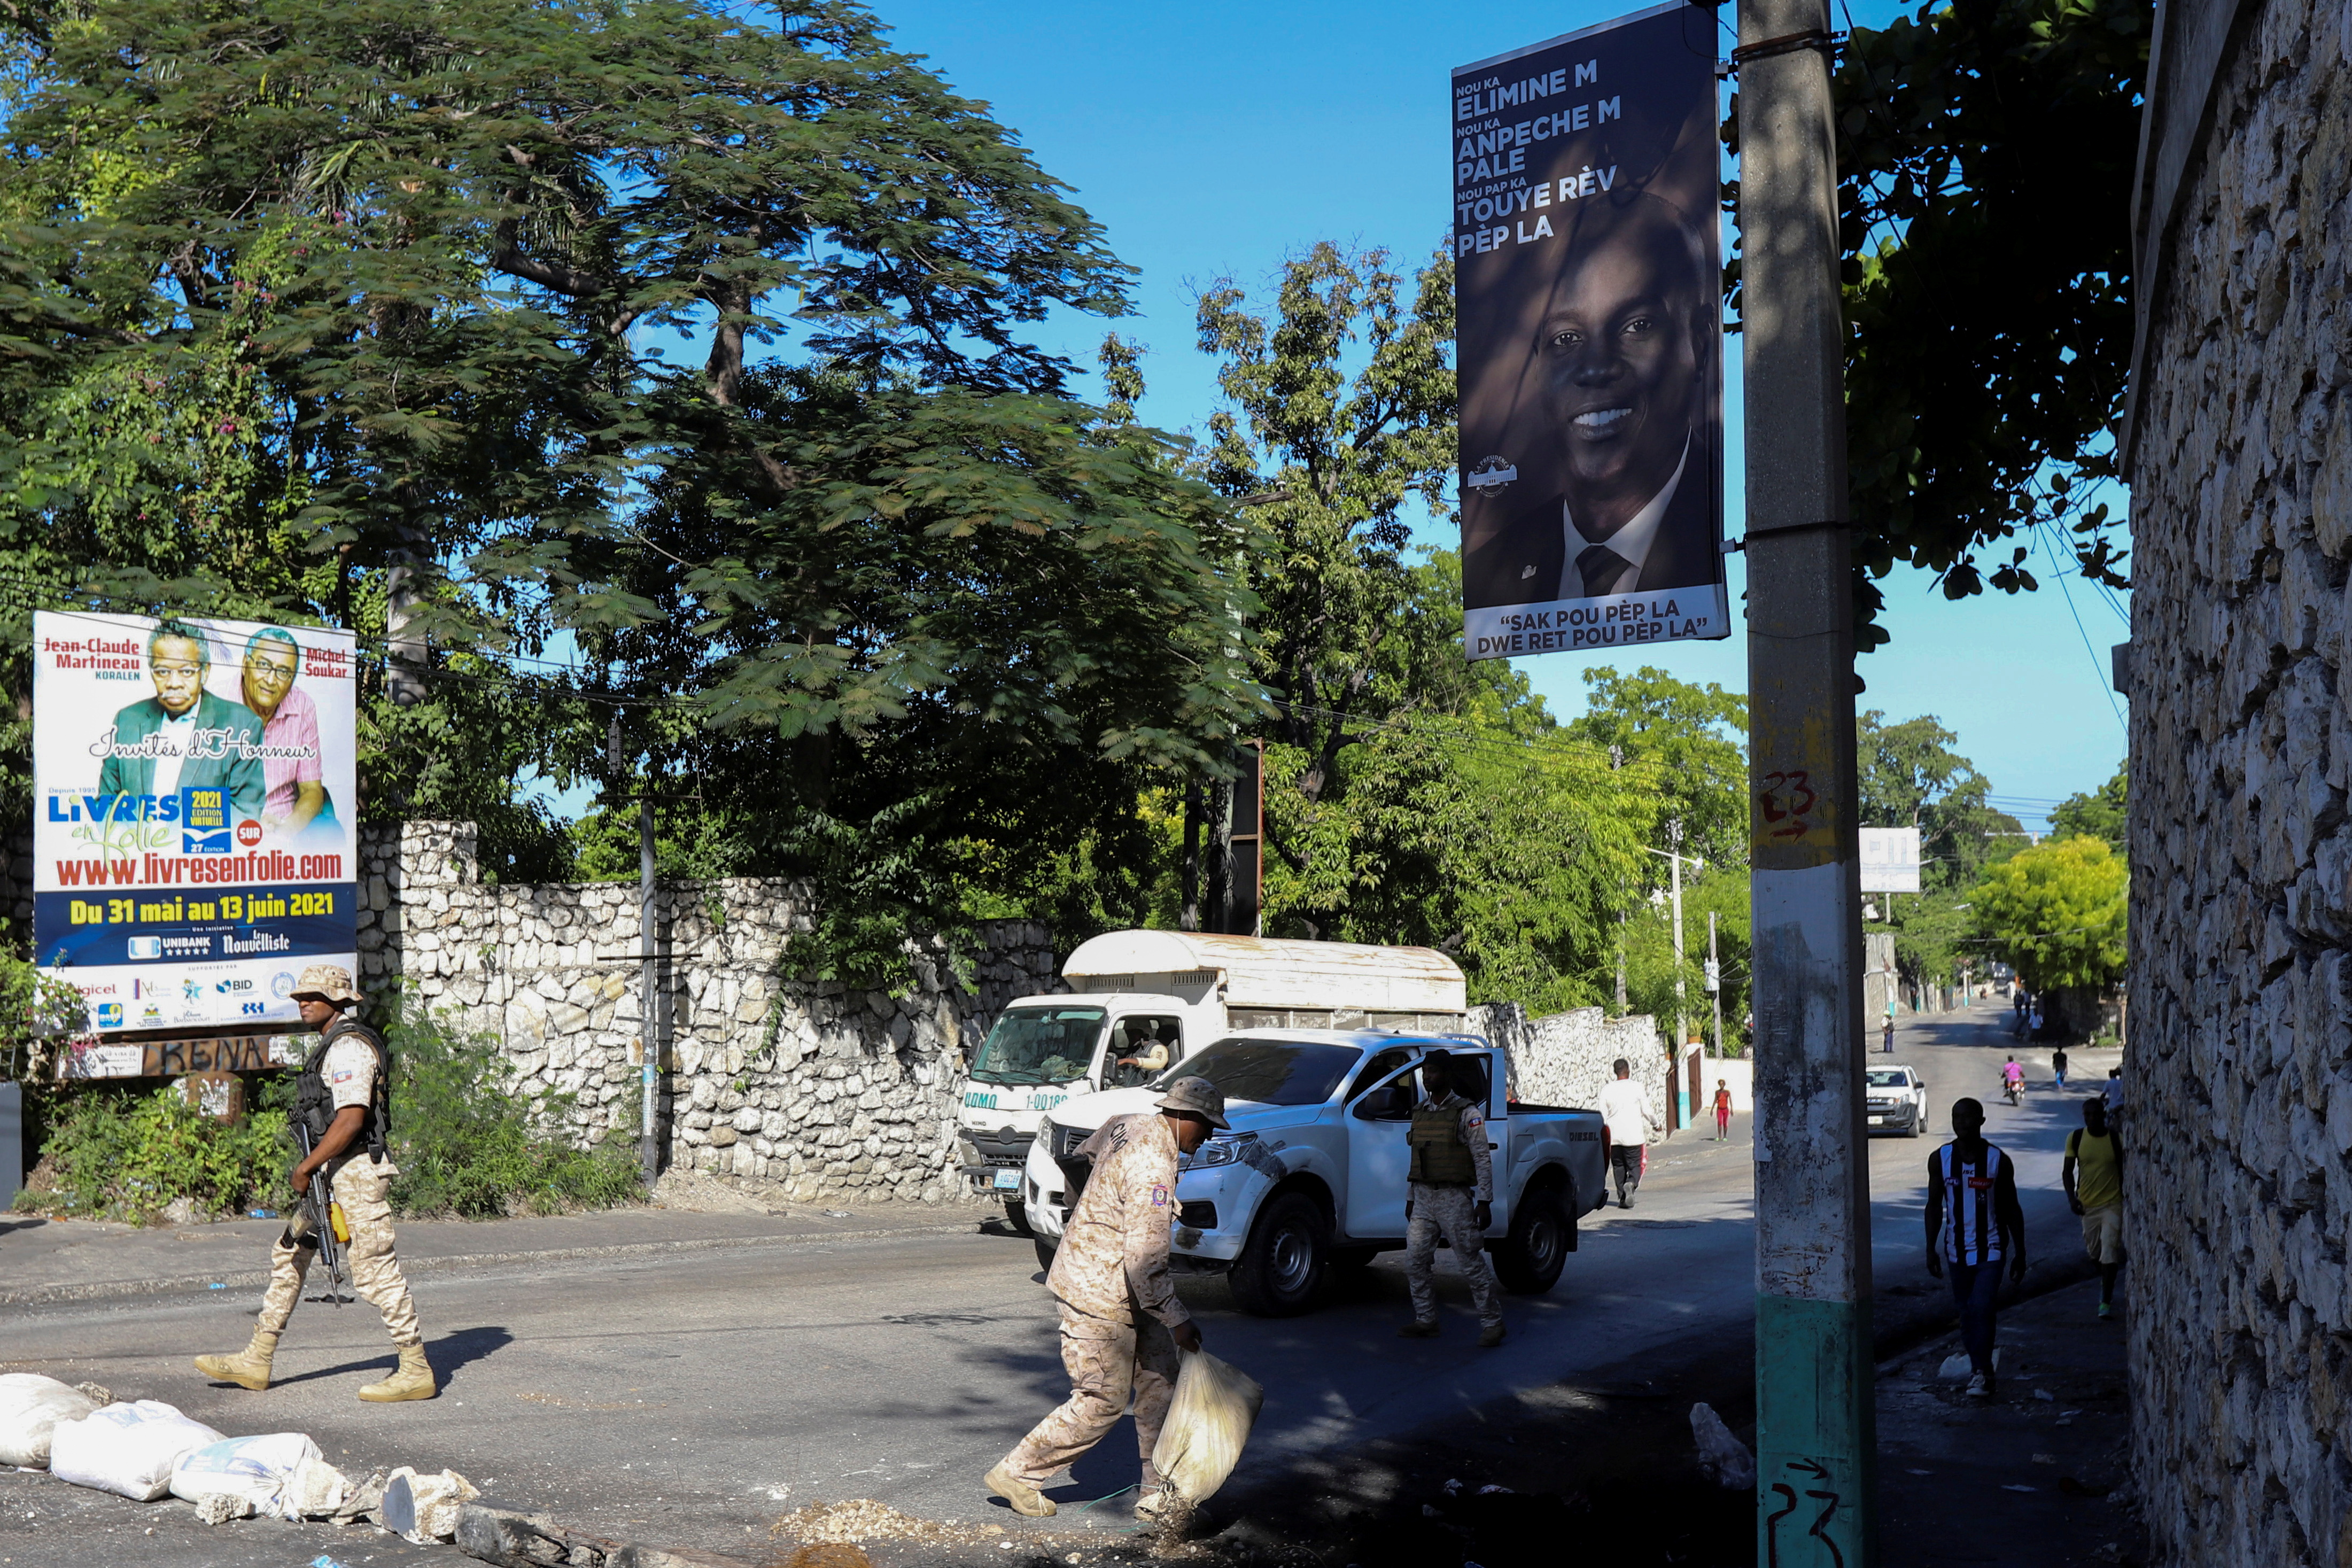 A sign with an image of assassinated President Jovenel Moise is seen as members of the Haitian National Police clear a street blockade set up in protest of insecurity and fuel shortages, in Port-au-Prince, Haiti October 25, 2021. REUTERS/Ralph Tedy Erol